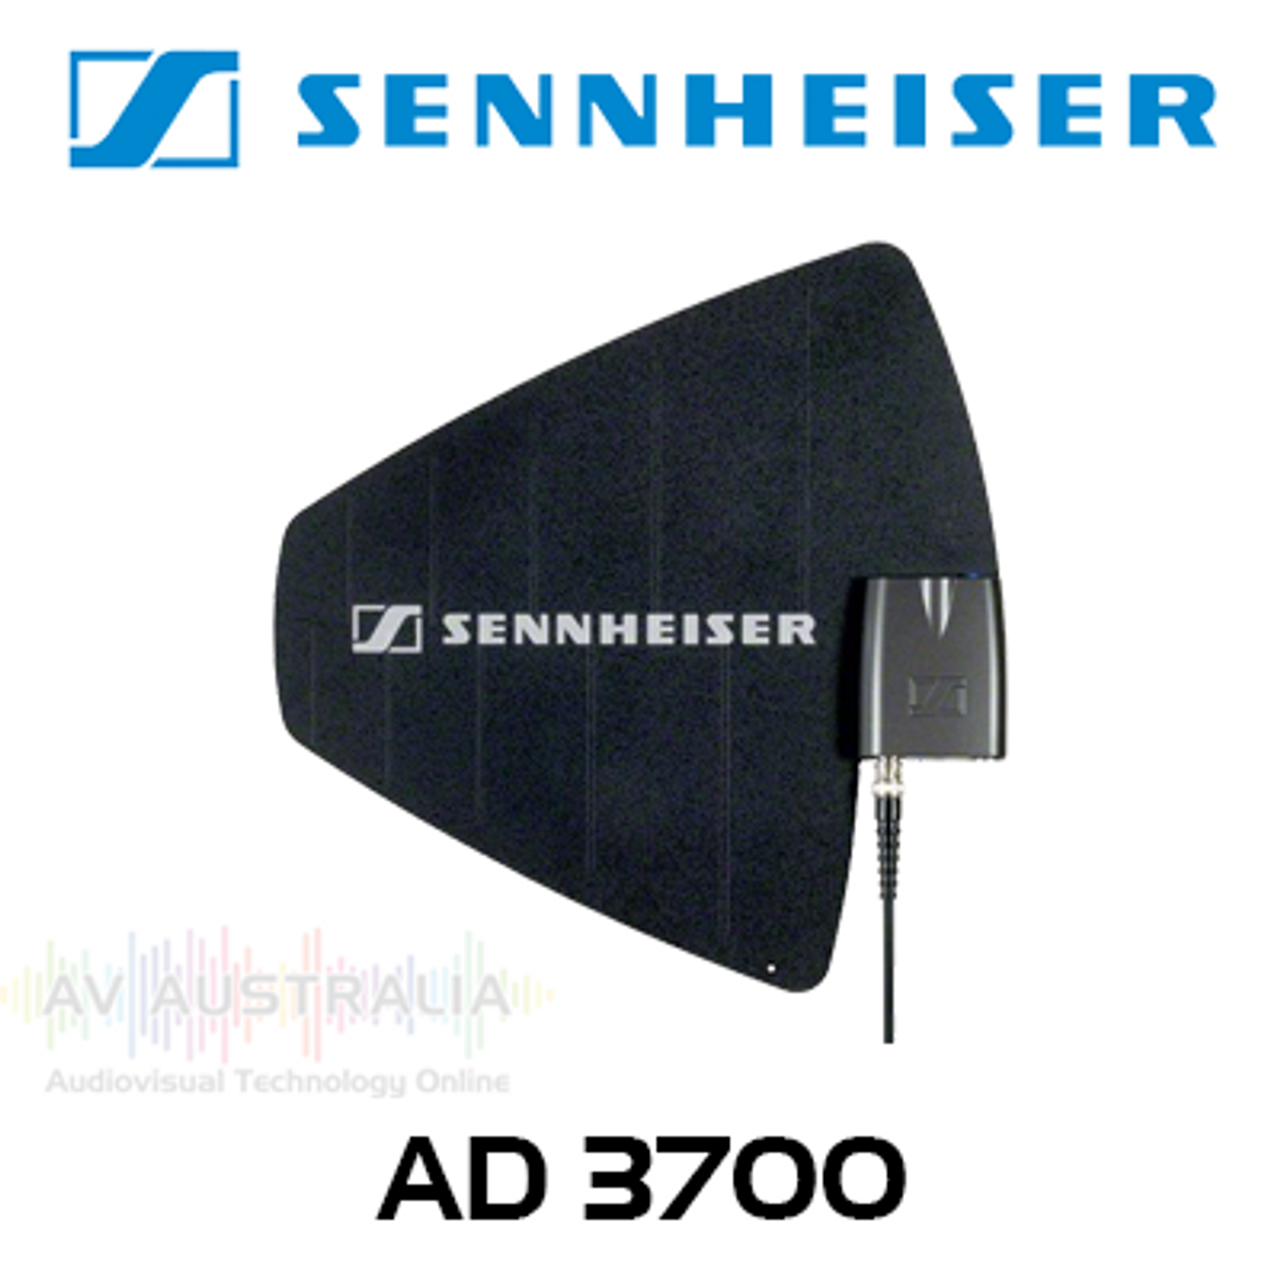 Sennheiser AD3700 Active Directional Antenna With Booster